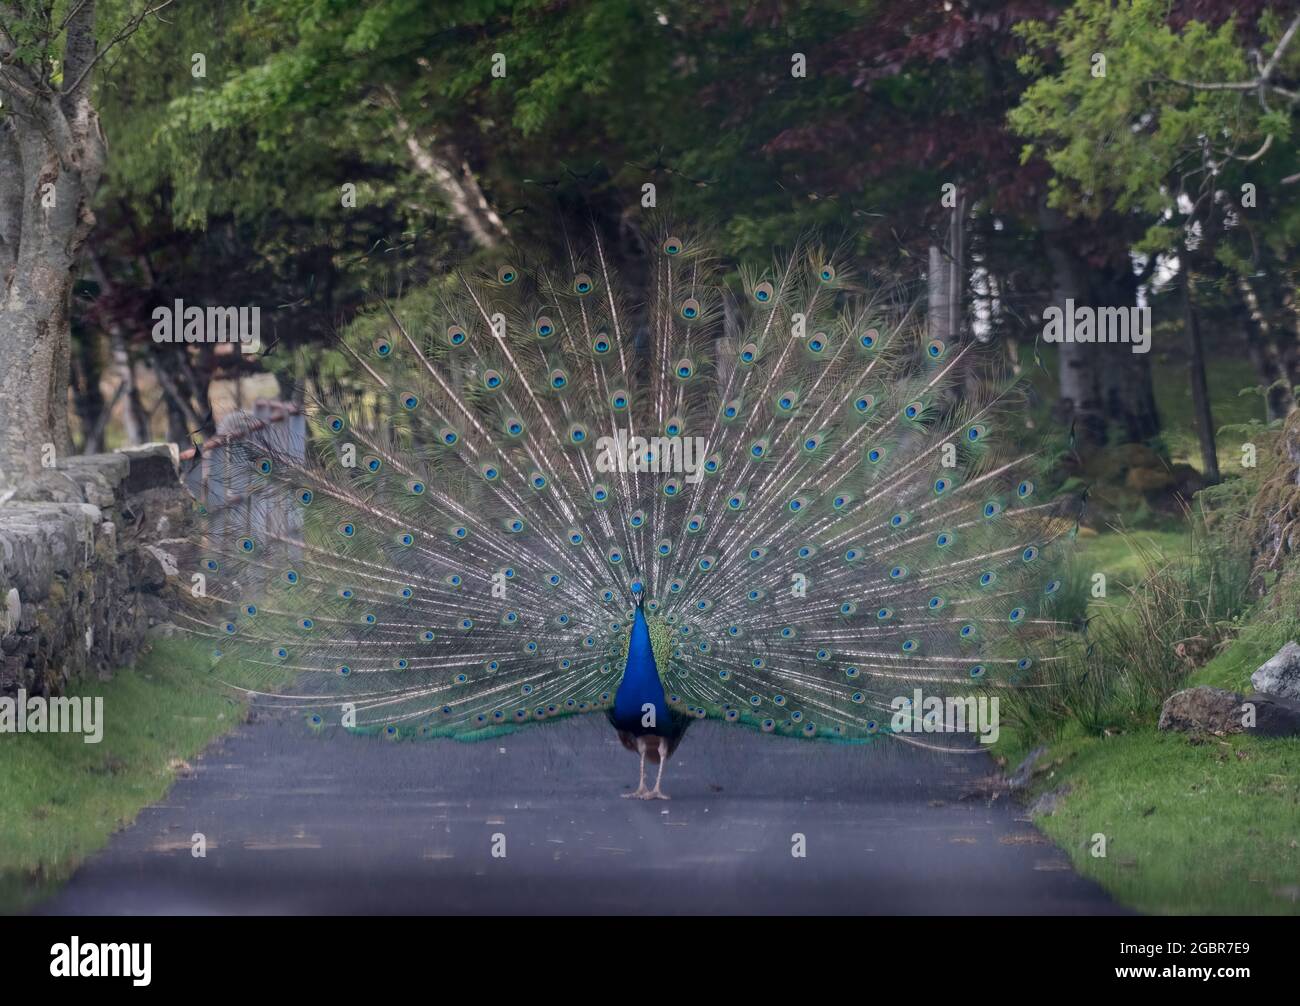 A peacock, pavo linnaeus, blocking road by displaying its plumage, Mull, Scotland Stock Photo